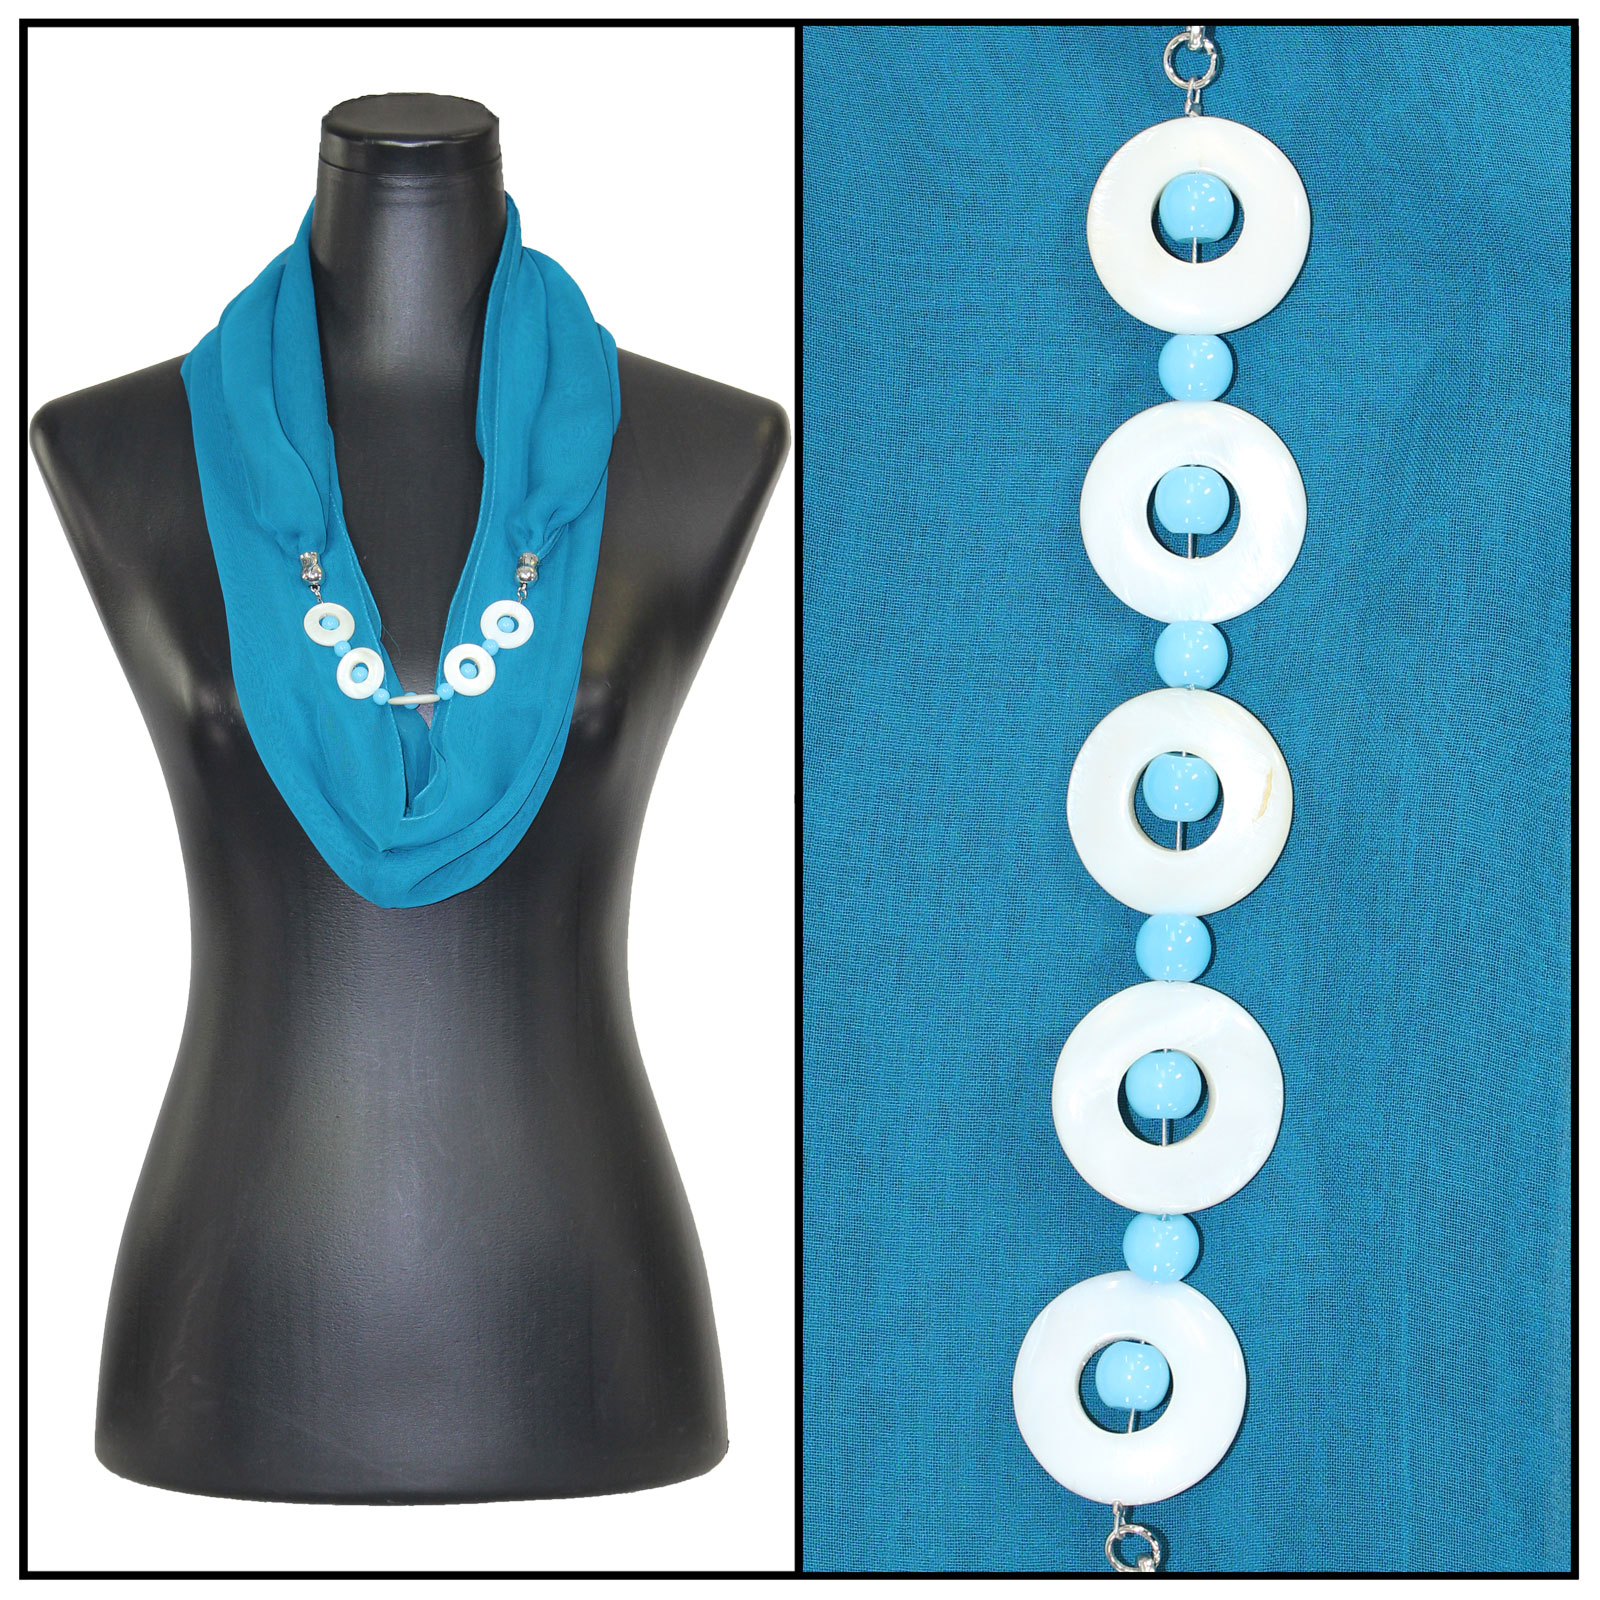 8011 - Solid Teal Jewelry Infinity Silky Dress Scarves